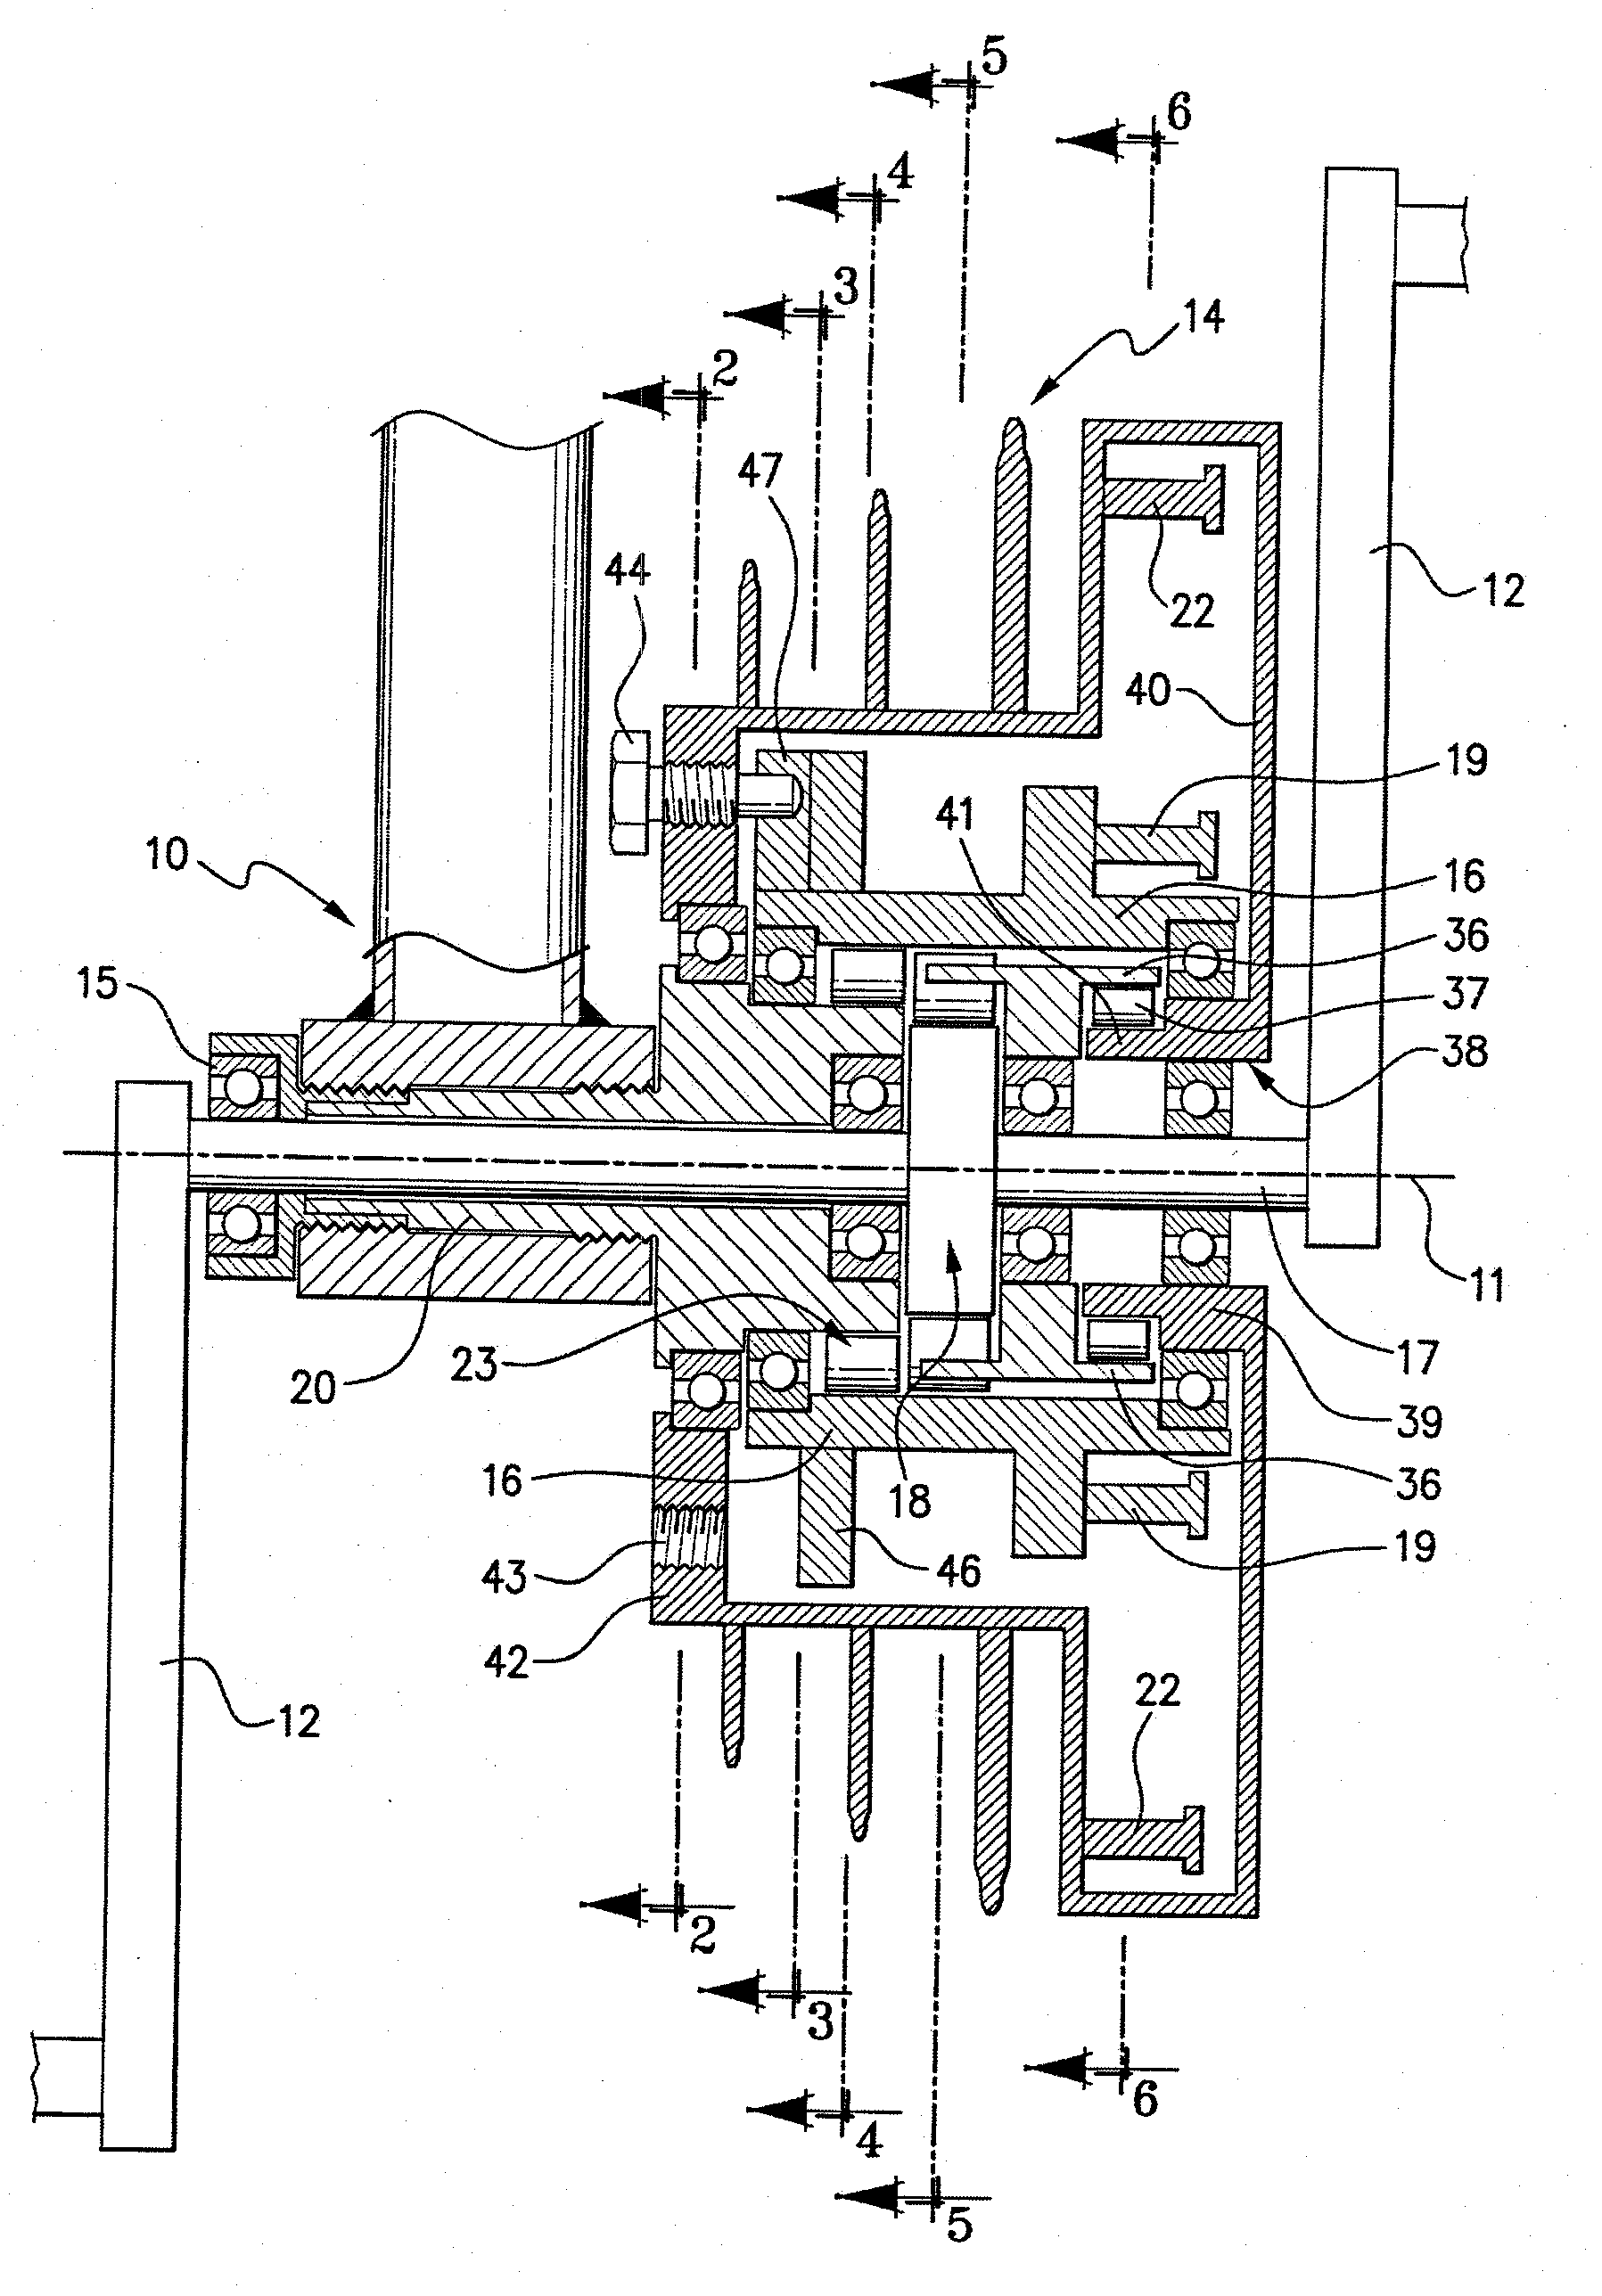 Human Energy Transduction and Storage System Having a One-Way Clutch